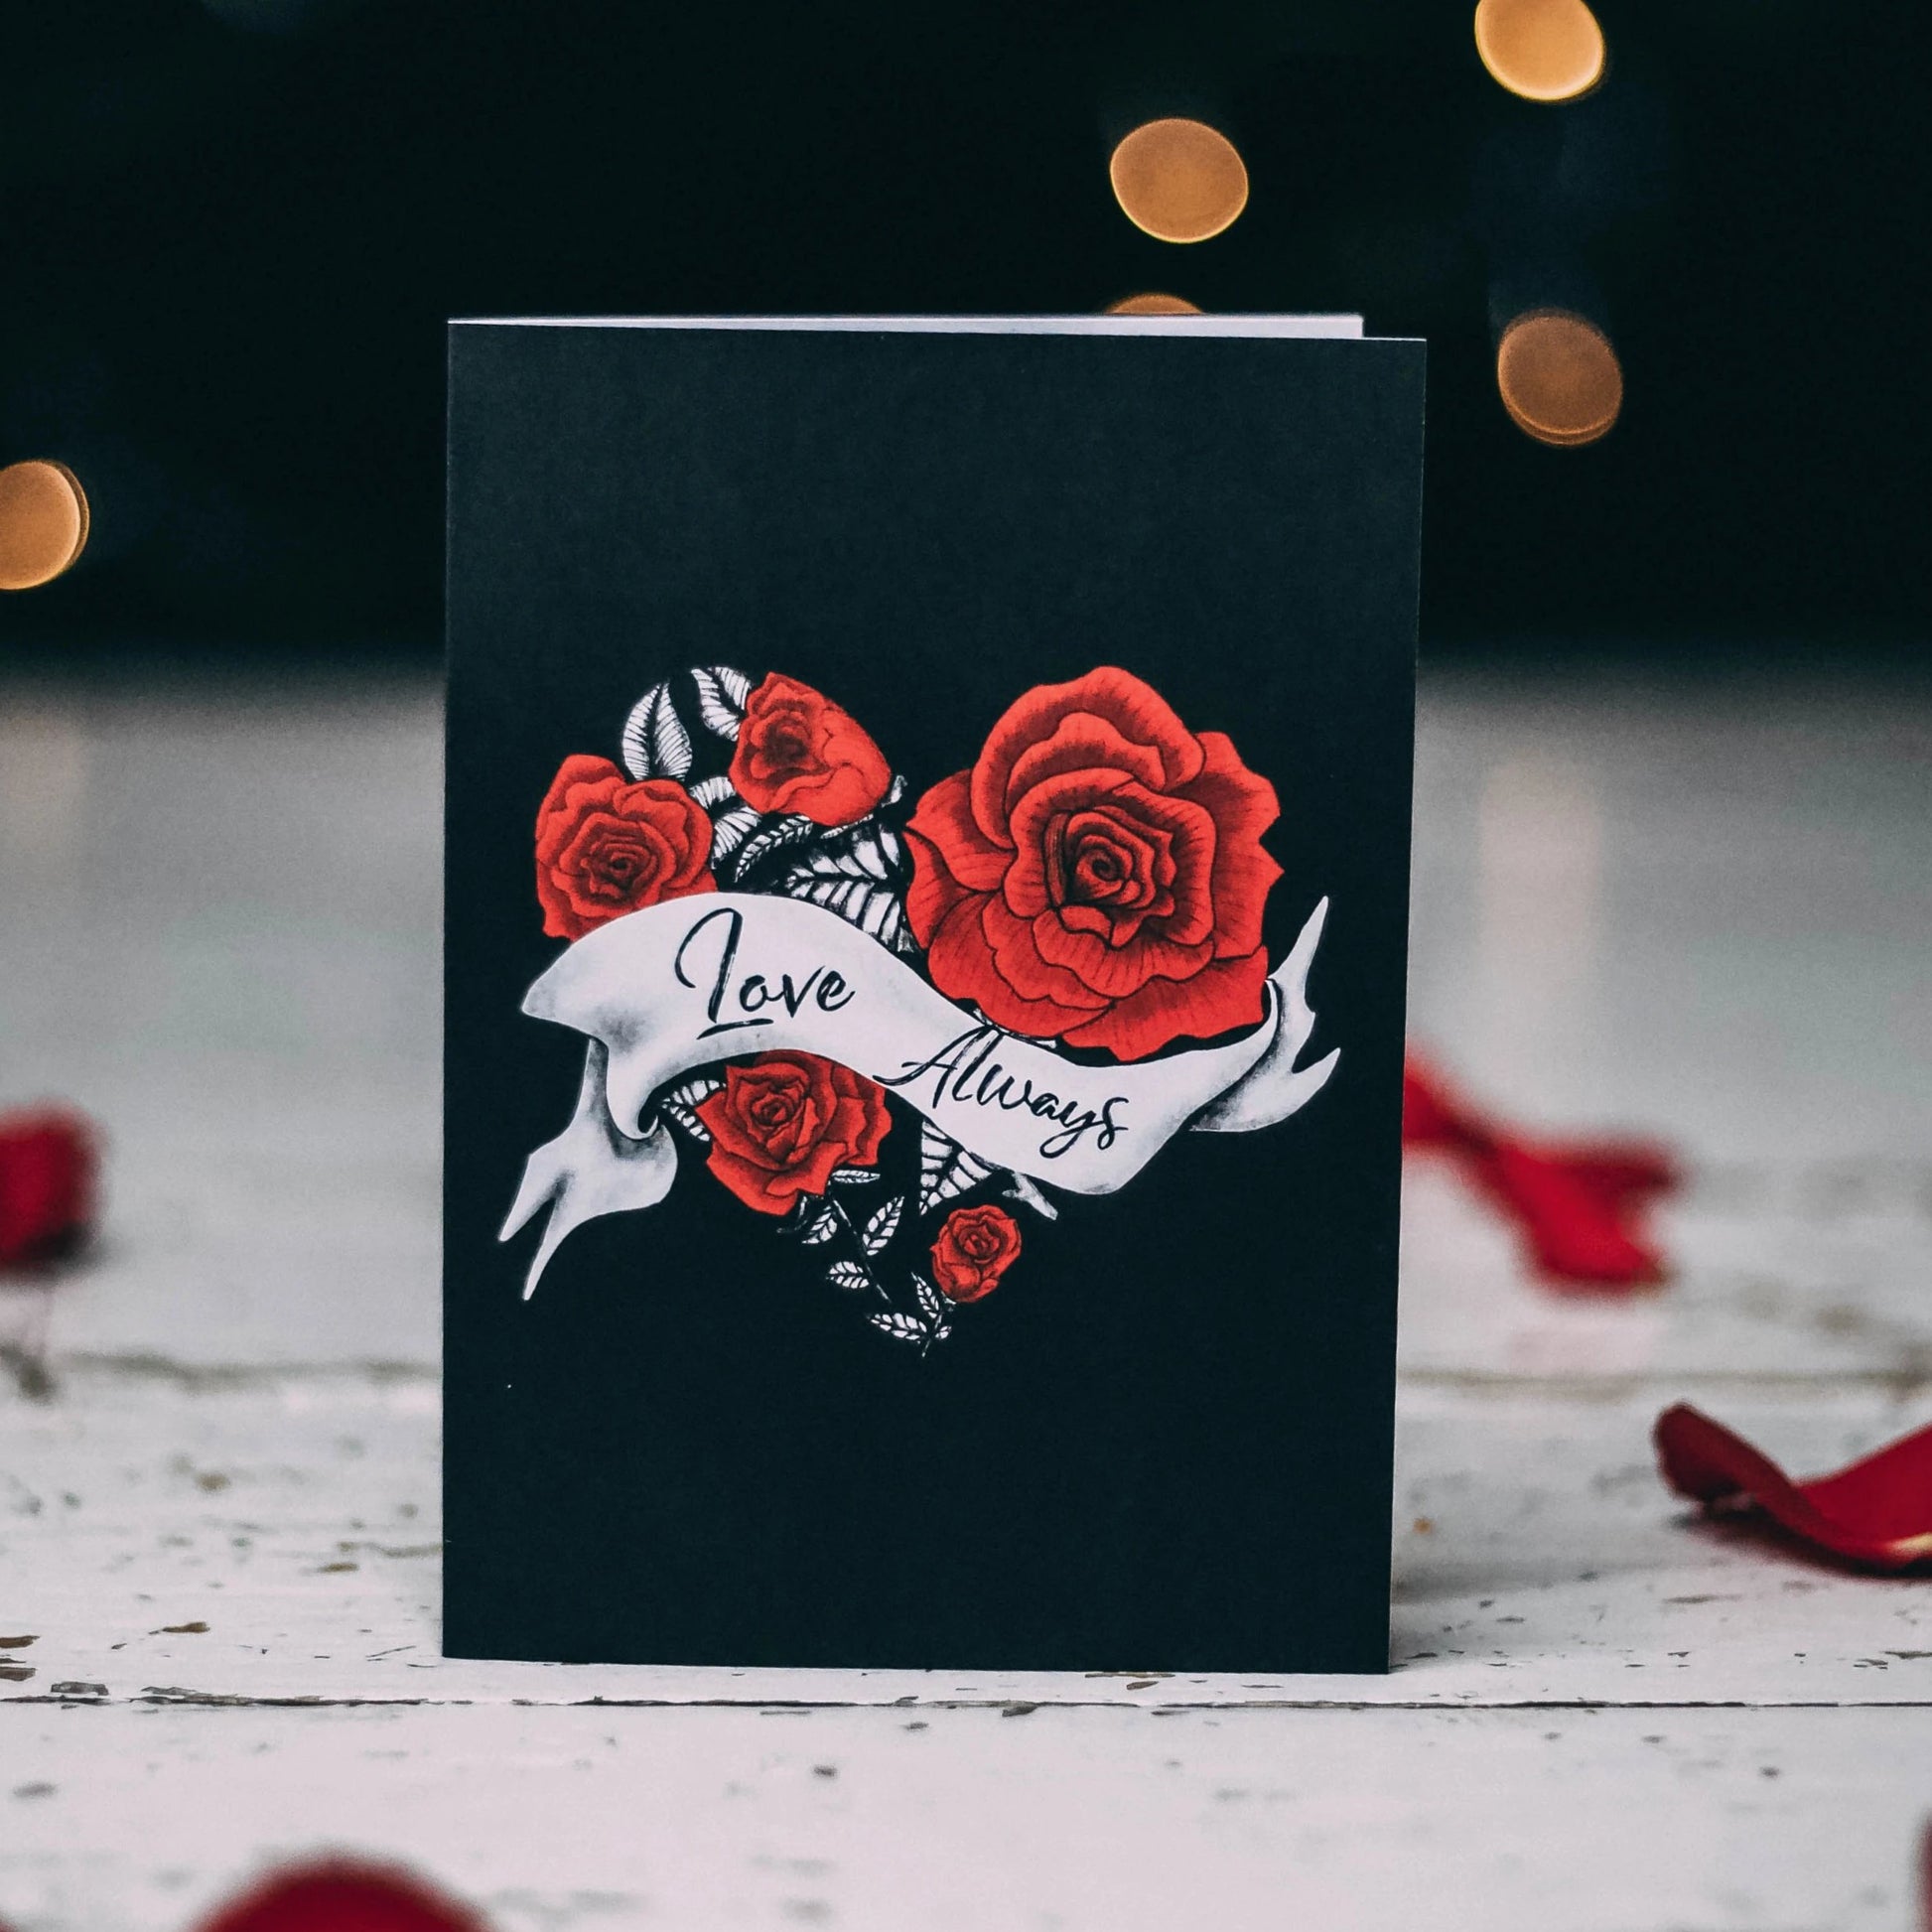 Love Always Heart and Roses Tattoo, Romantic Card